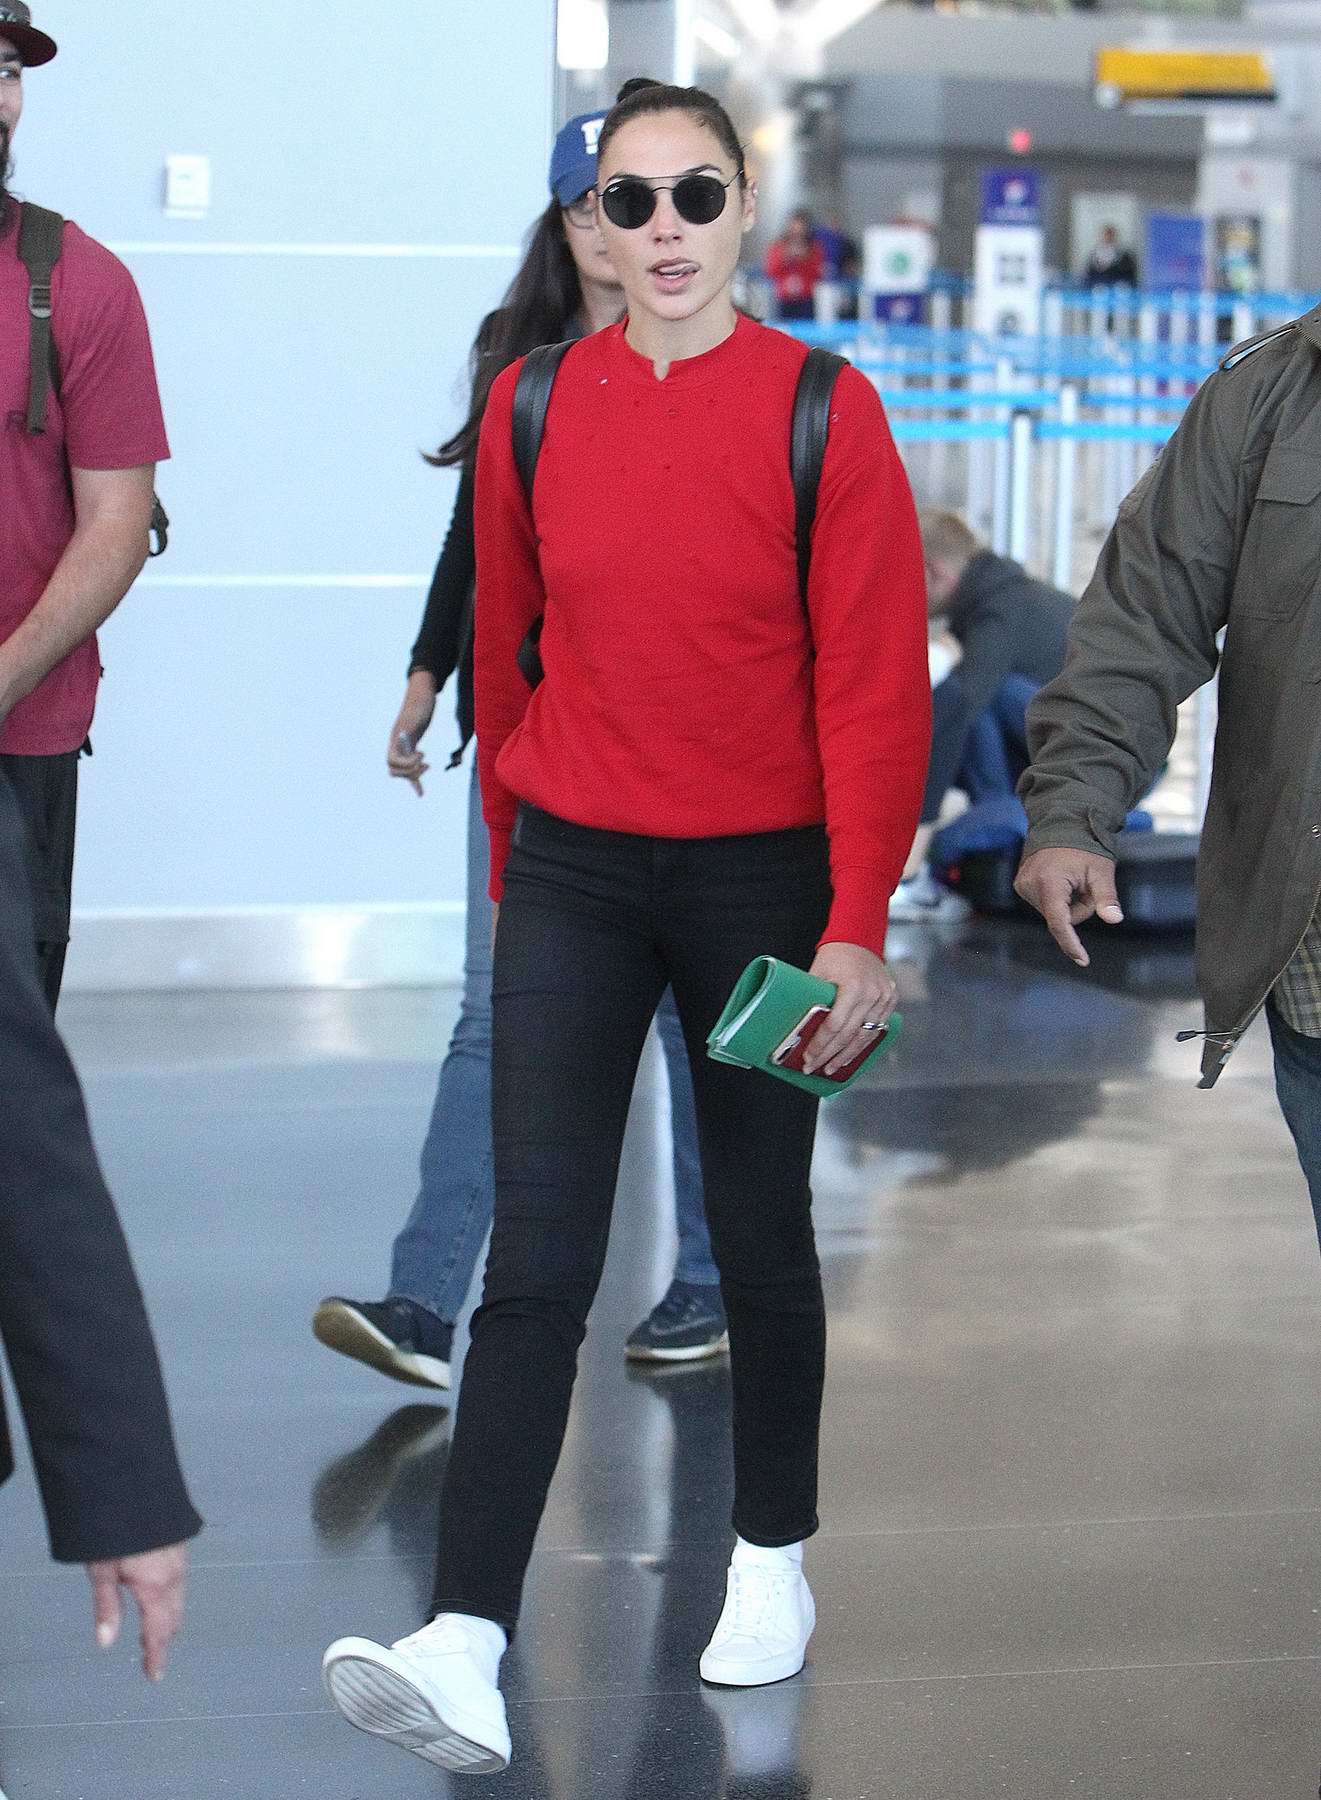 gal gadot in a red sweater arrives back at jfk airport in new york-011017_6